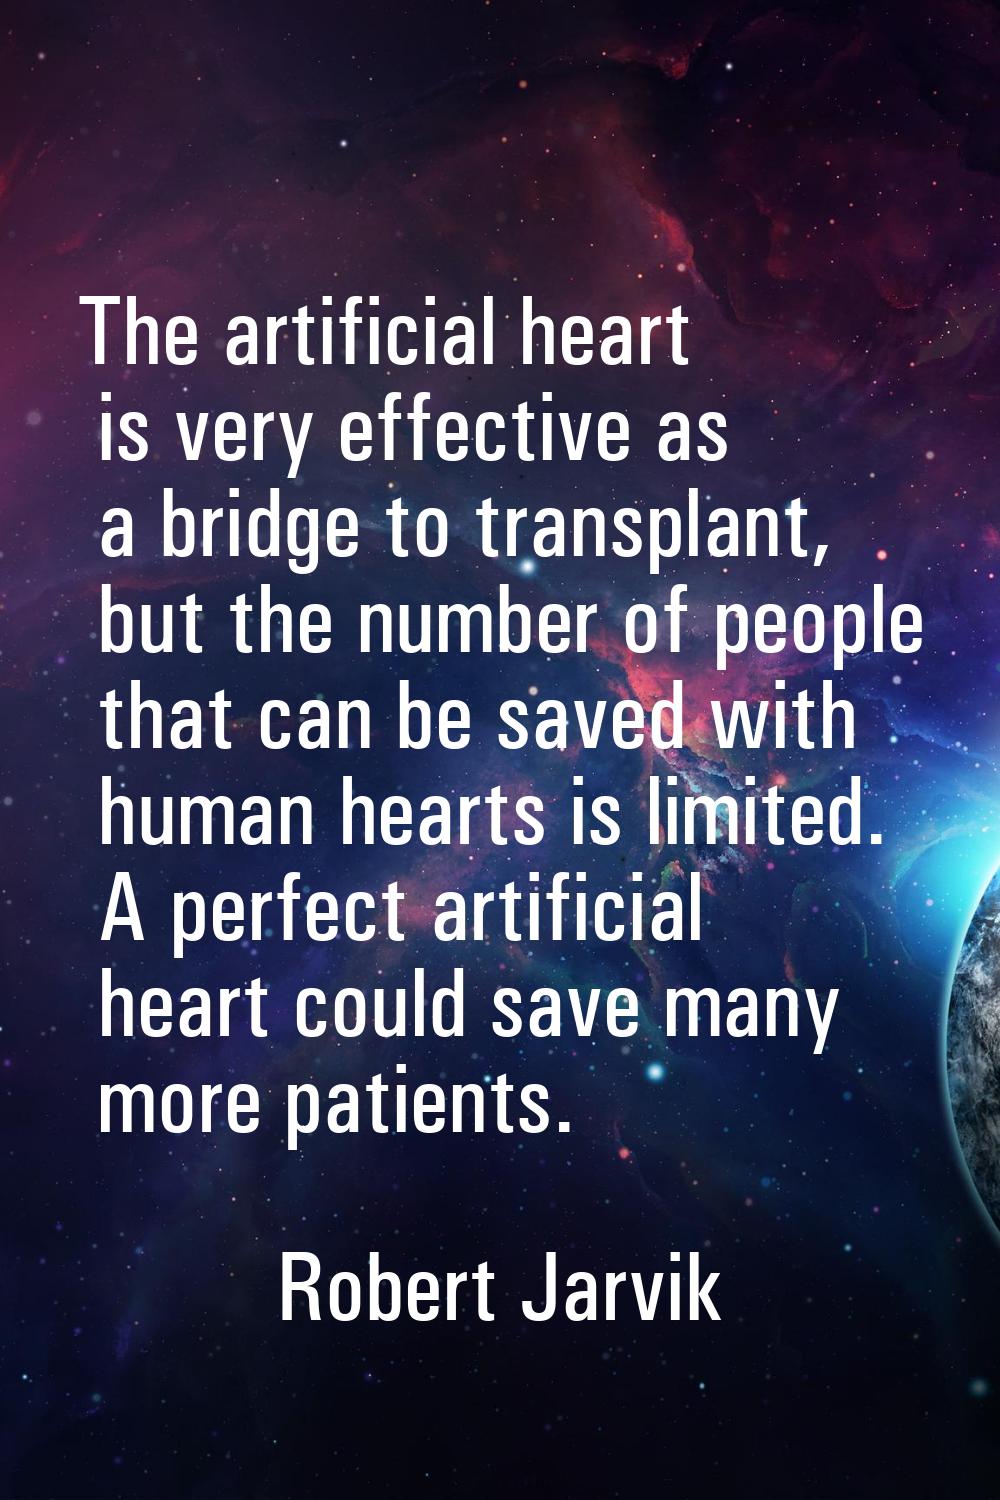 The artificial heart is very effective as a bridge to transplant, but the number of people that can